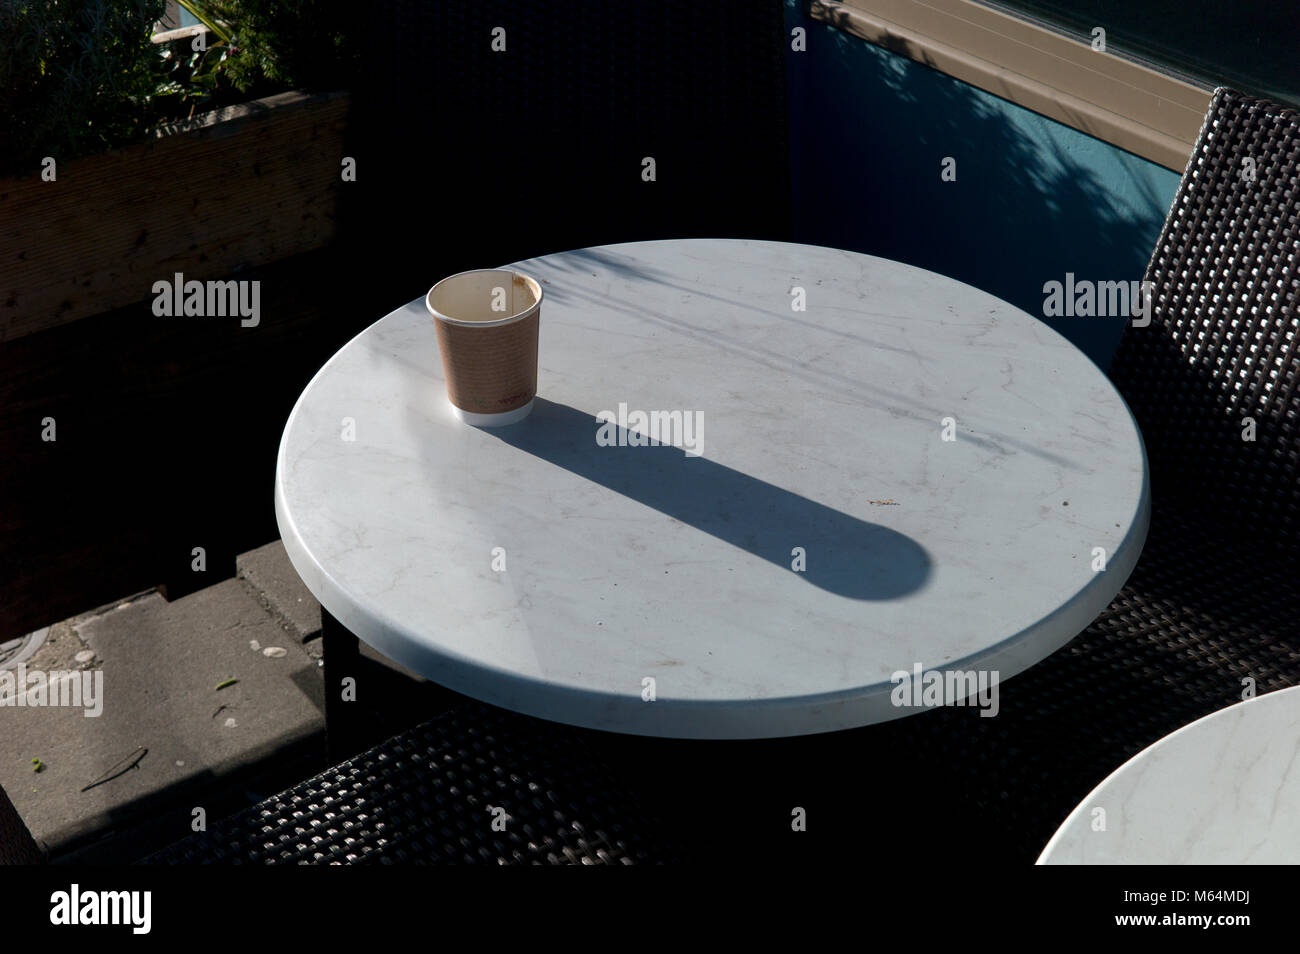 Empty take-away coffee cup on table, long shadow Stock Photo